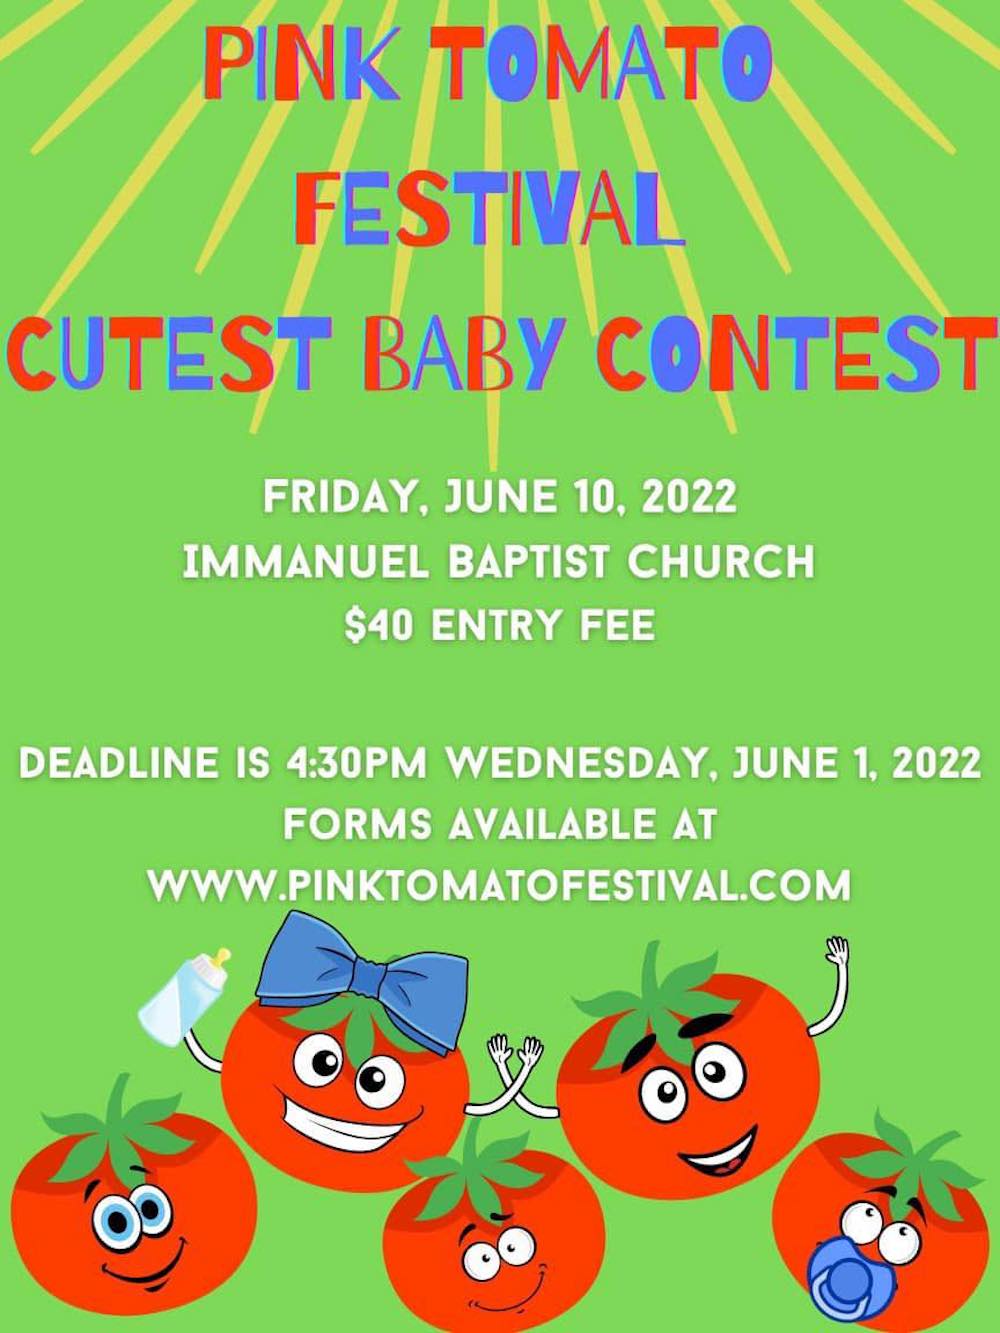 PTF Cutest Baby Contest sign-up deadline Wednesday